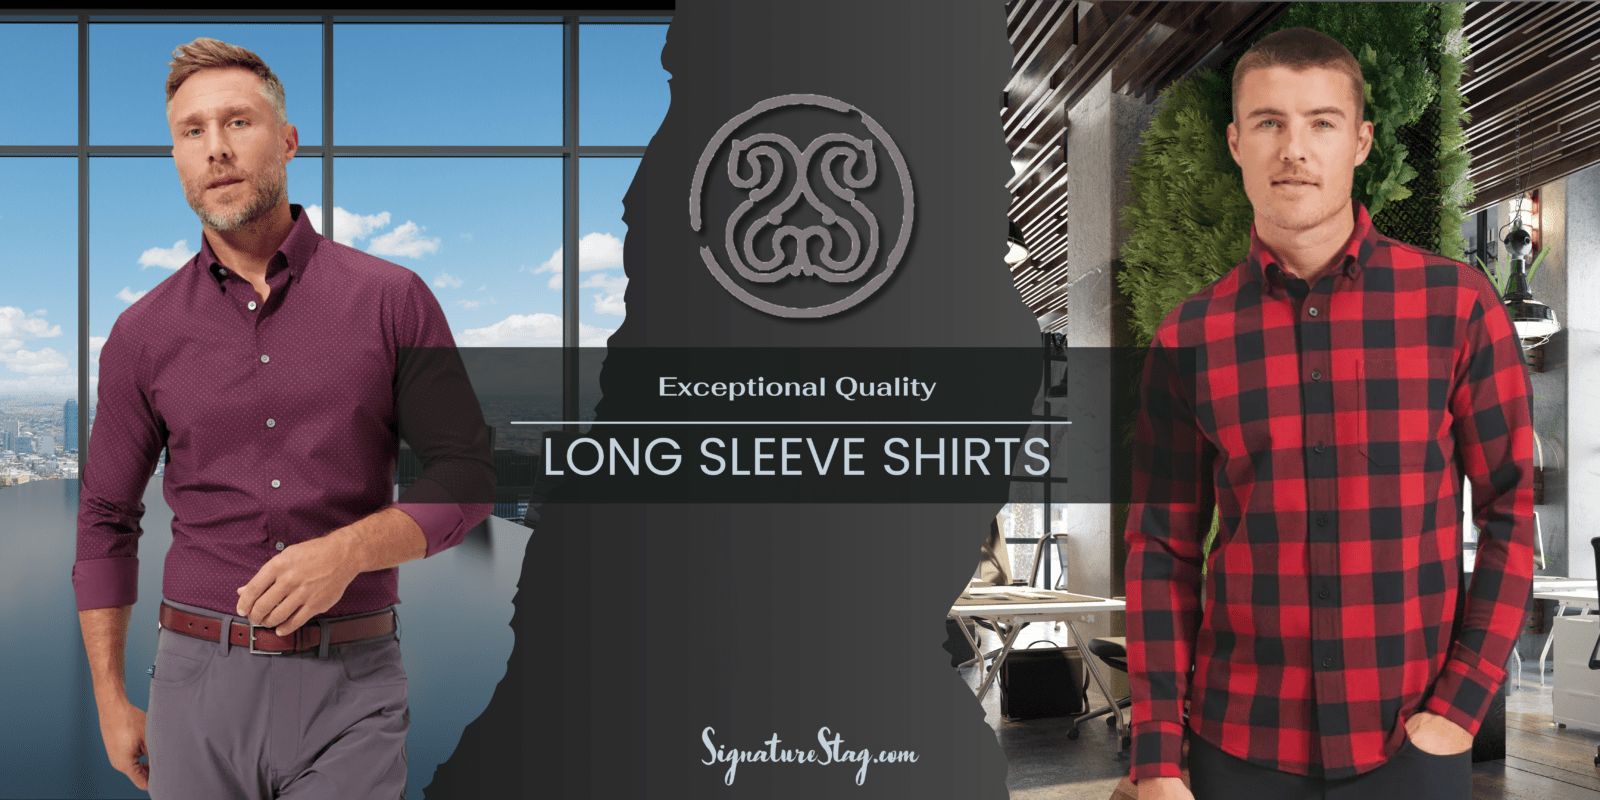 Find Long Sleeve Shirts for Men in Lubbock TX and Midland TX. Shirts for men featuring performance fabric that stays dry and wrinkle-free all-day long. Look great, feel better.